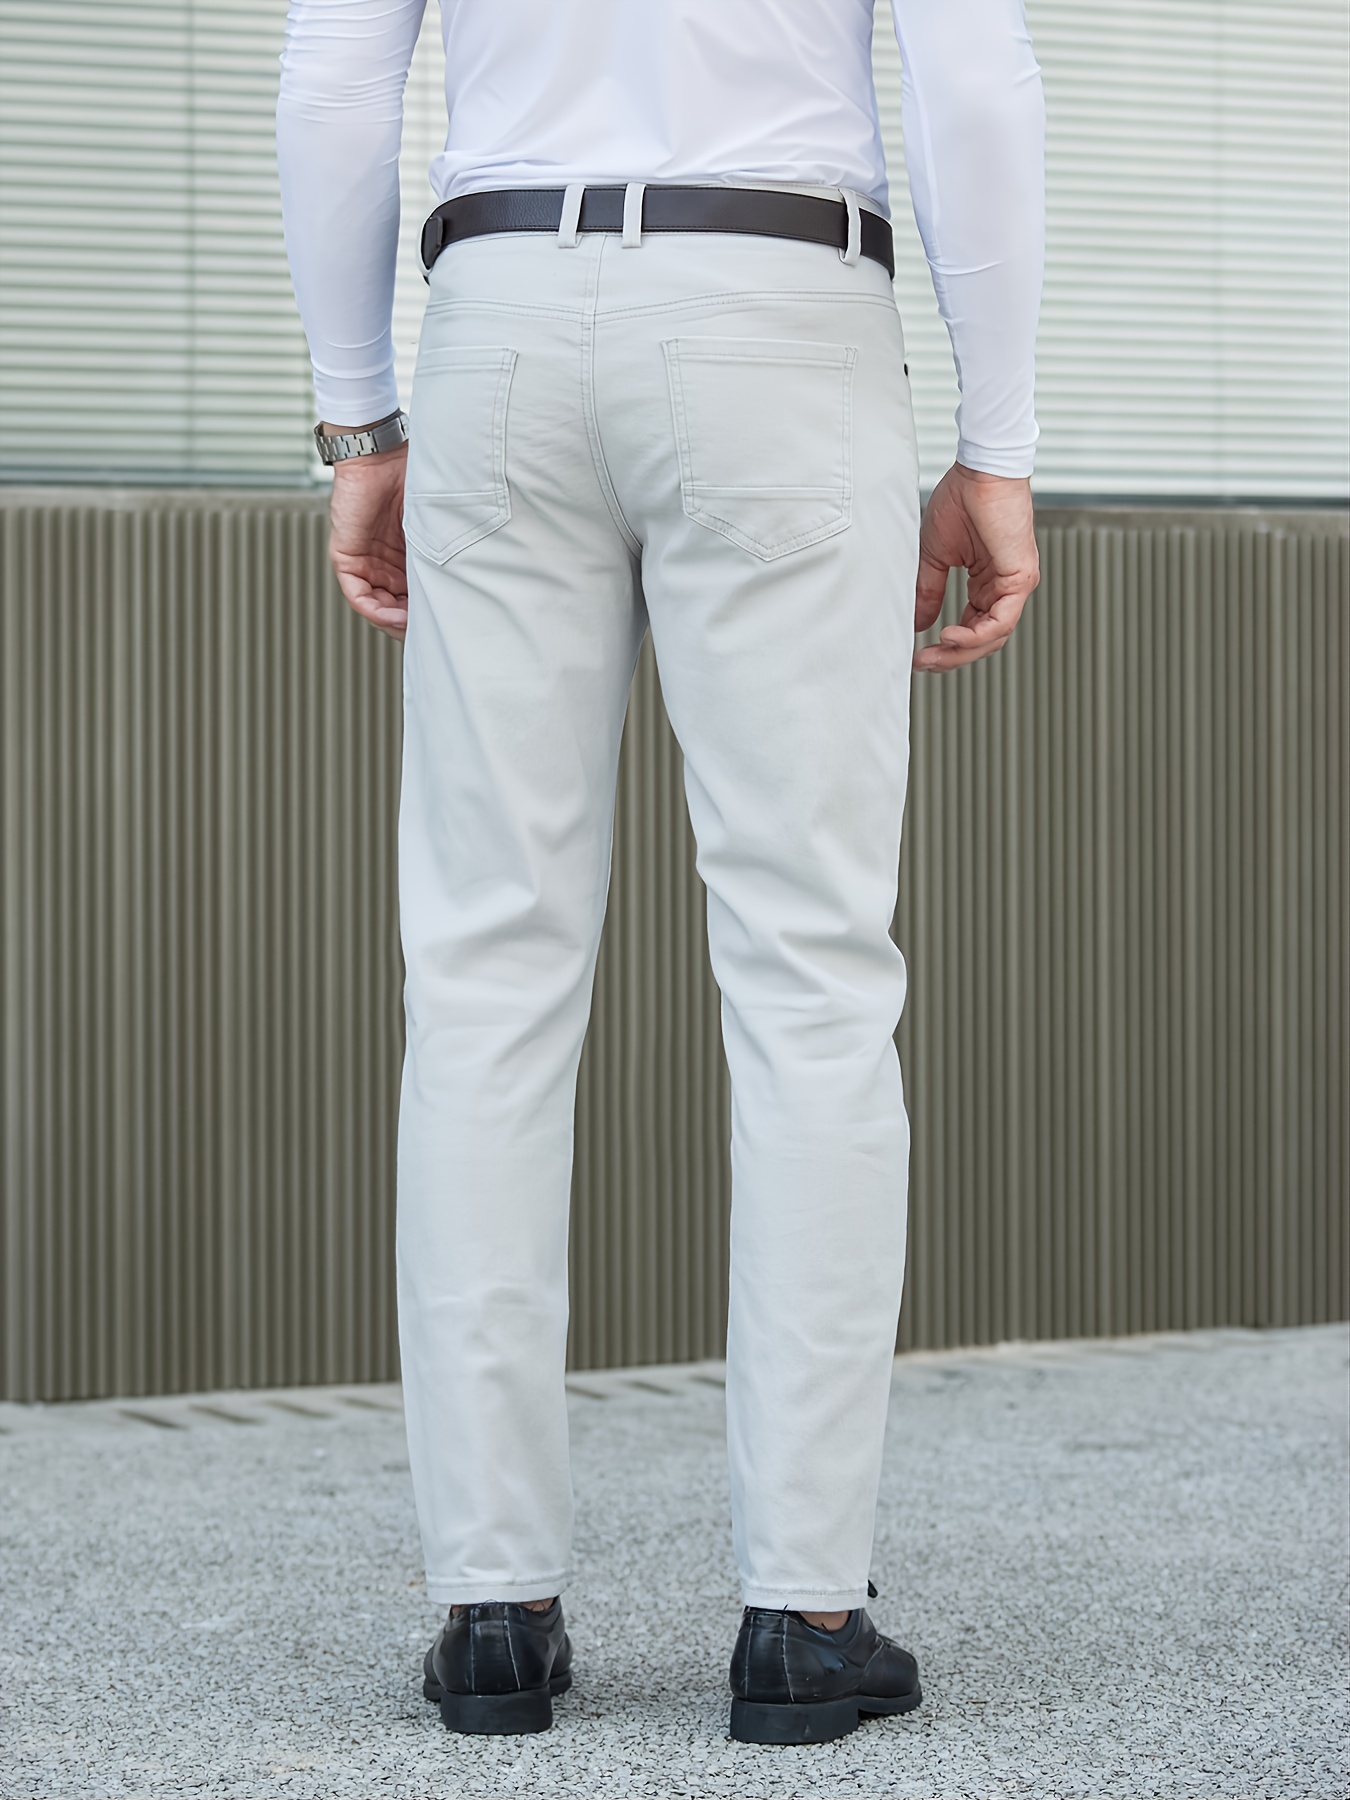 mens casual straight fit business pants